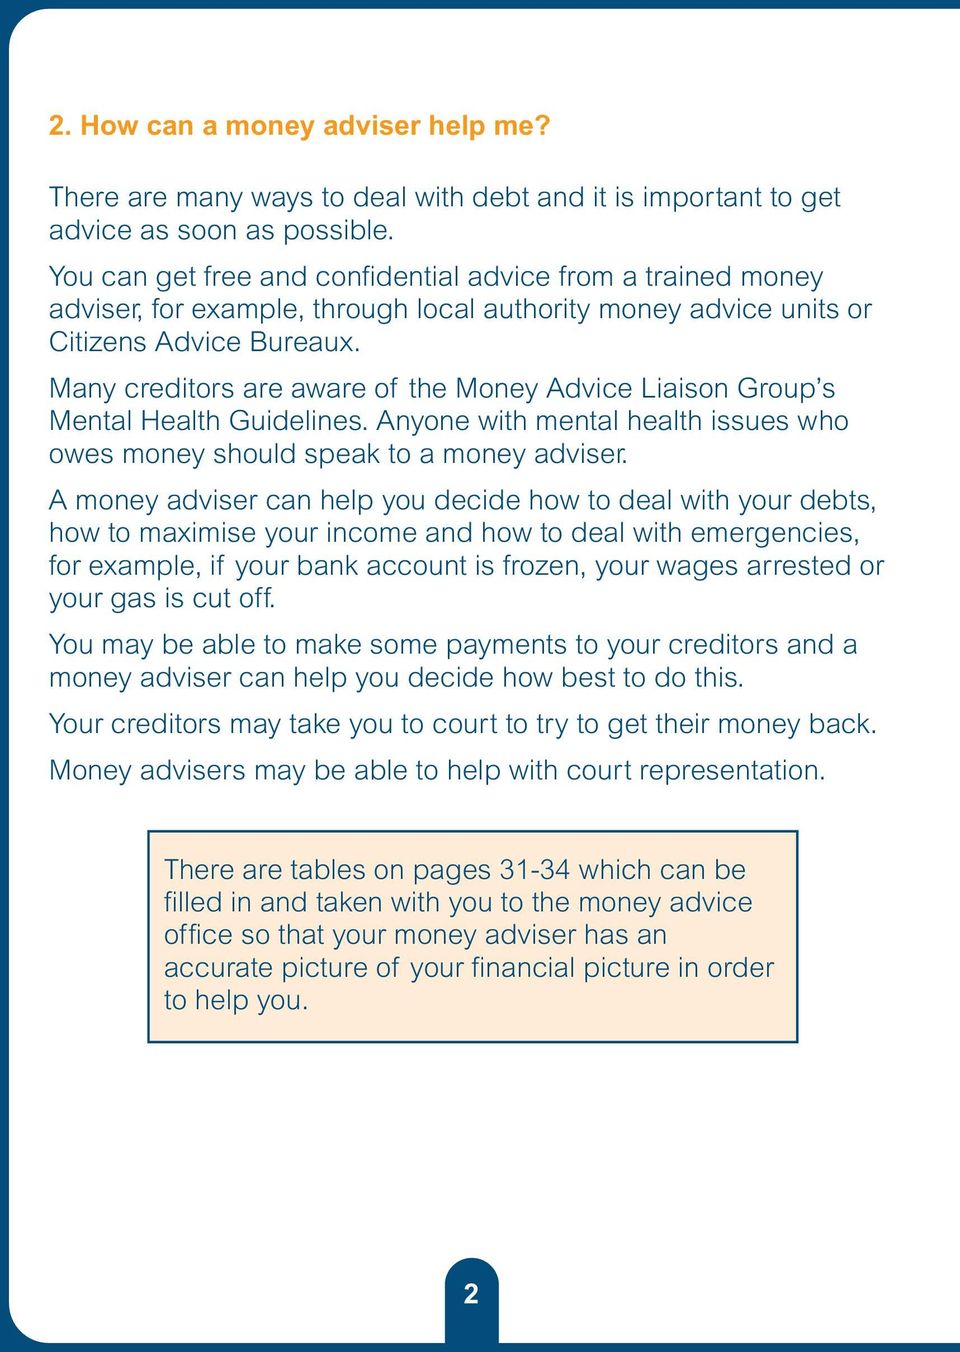 Many creditors are aware of the Money Advice Liaison Group s Mental Health Guidelines. Anyone with mental health issues who owes money should speak to a money adviser.